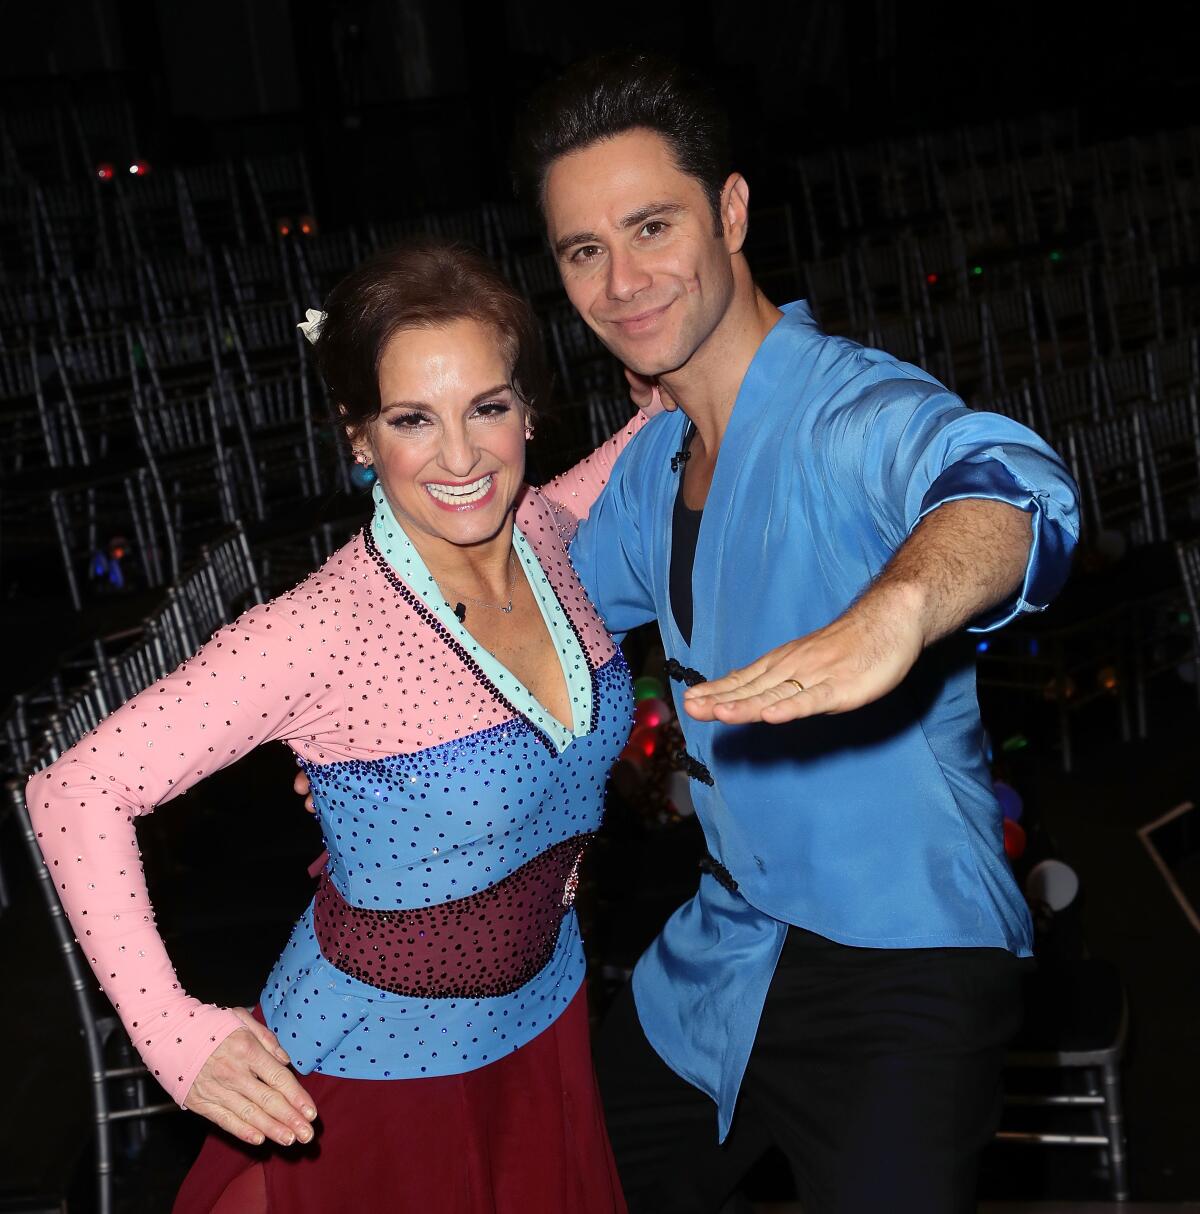 Mary Lou Retton’s ‘DWTS’ partner shares gymnast's health update Los